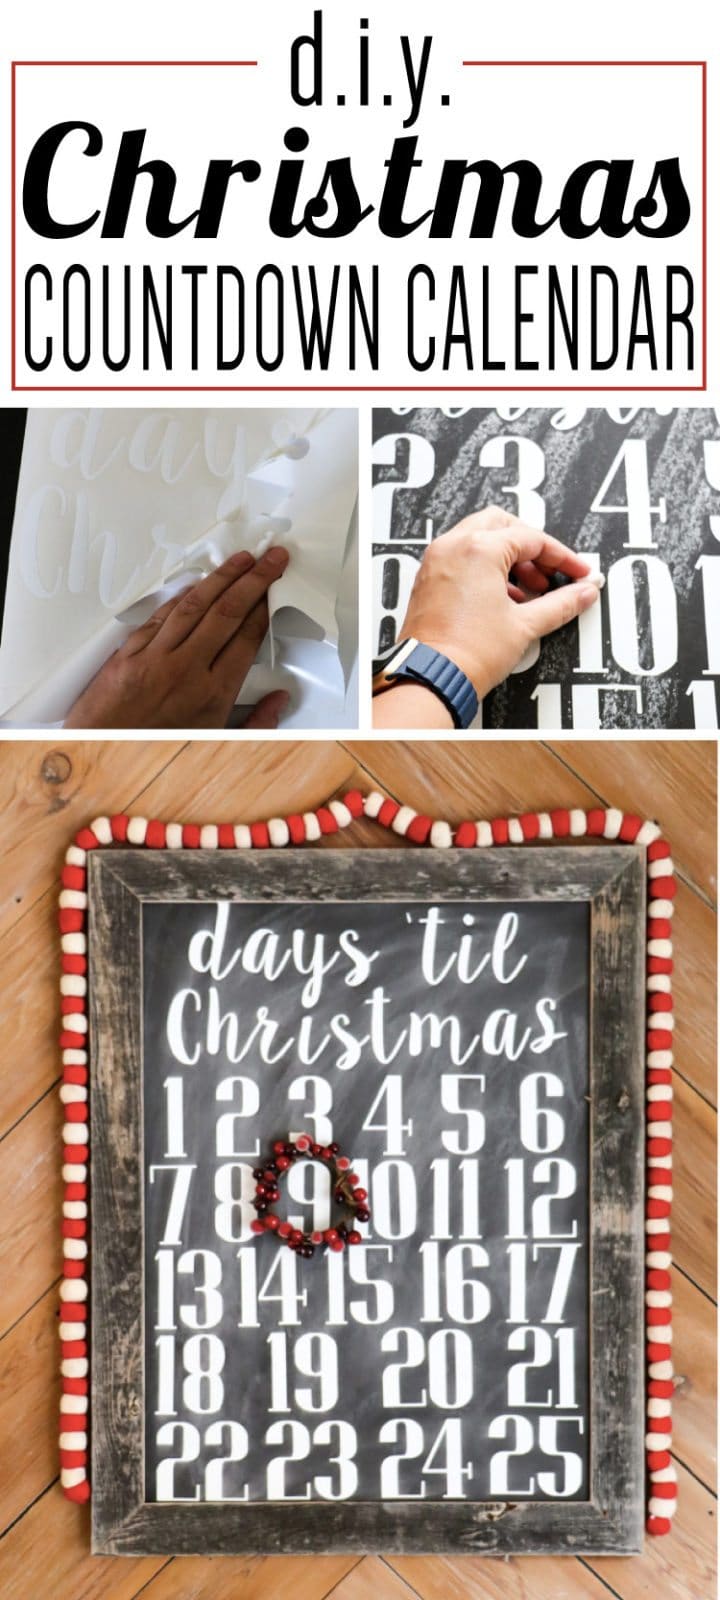 OMG, I love this DIY Christmas countdown calendar and it looks so easy to make! The fact that it's a chalkboard sign as well is just perfect.